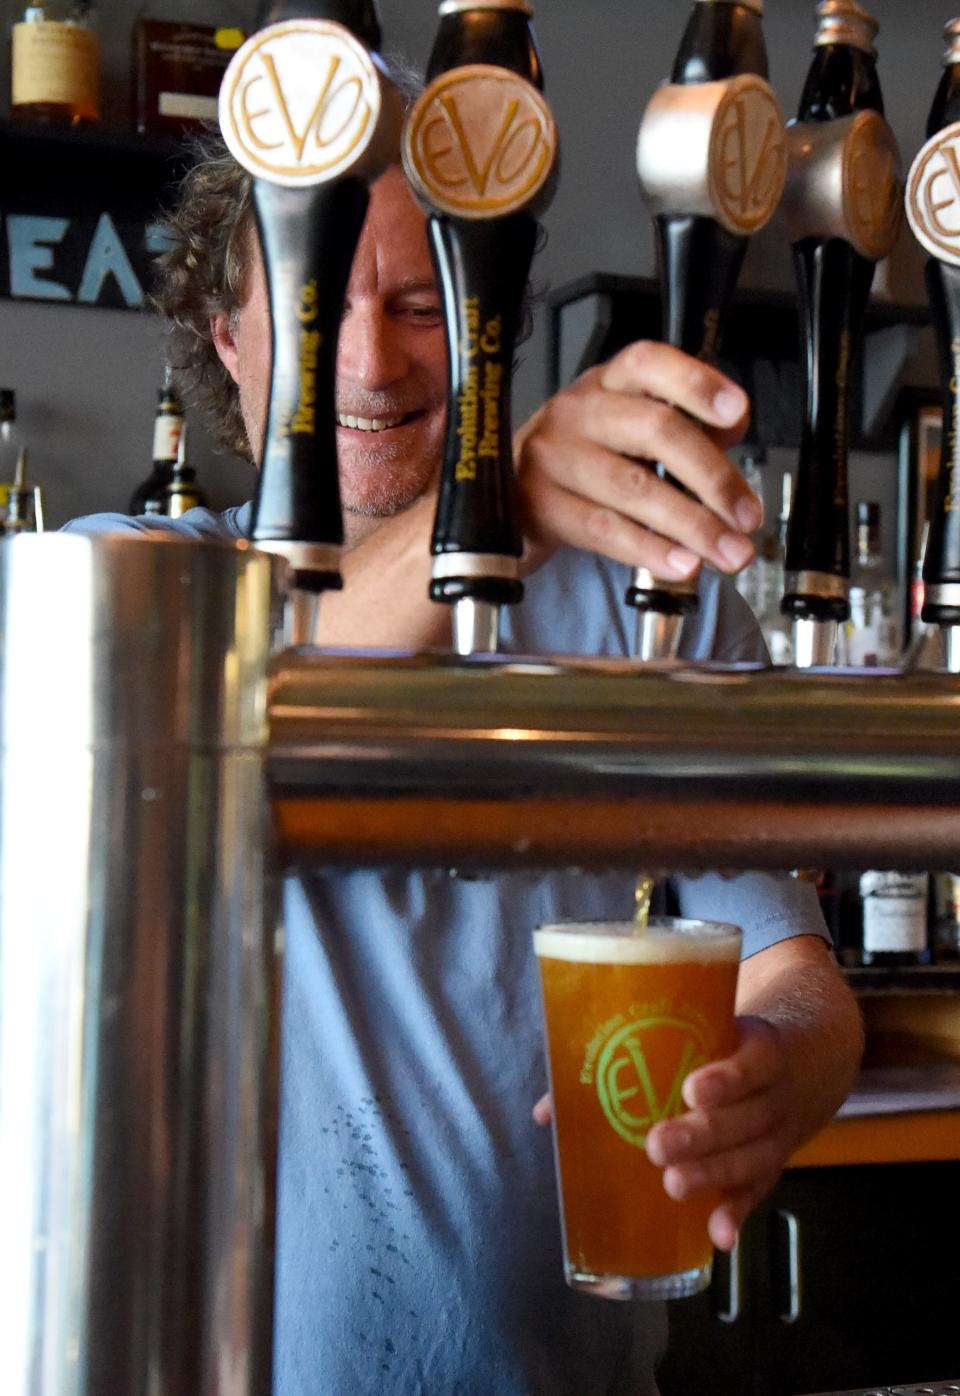 Tom Knorr, co-founder of Evolution Craft Brewing Company, pours a beer in the Tasting Room and Brewery Friday, Aug. 27, 2021, in Salisbury, Maryland.